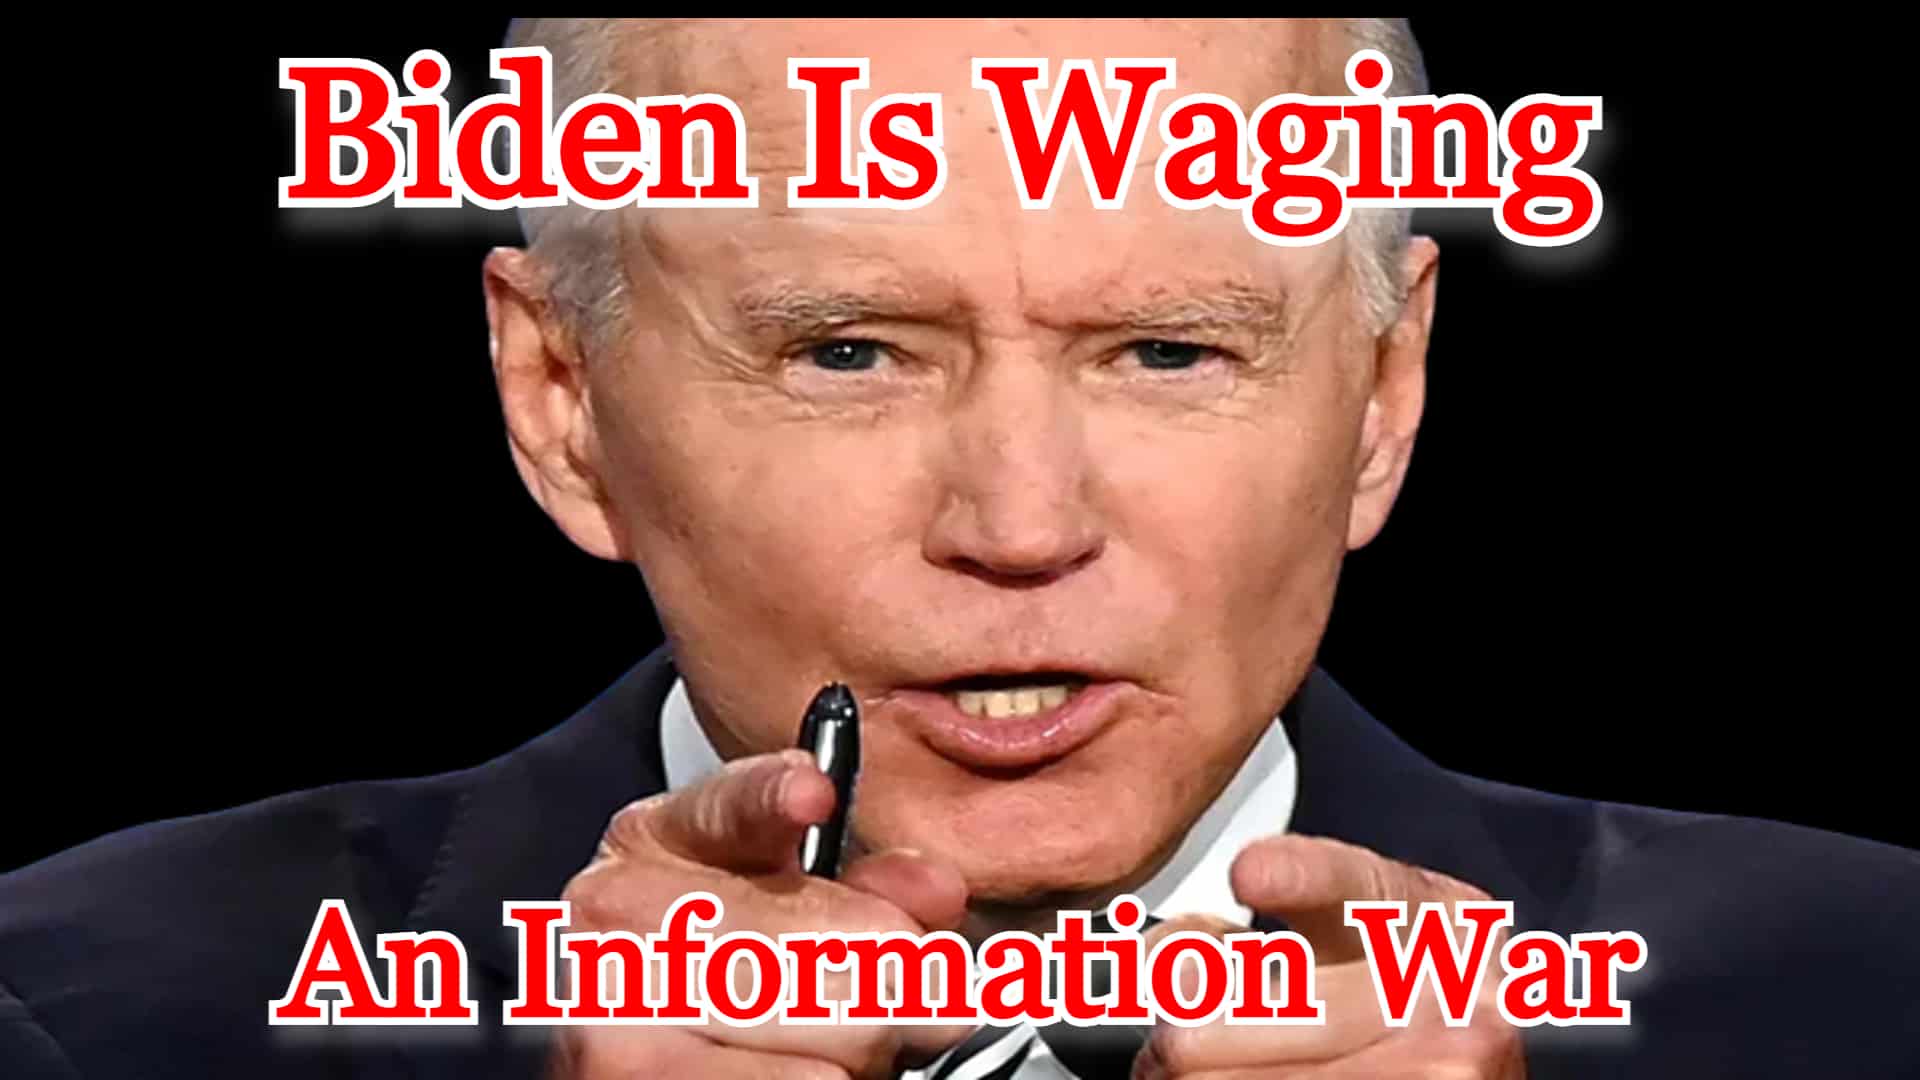 COI #260: The Biden Administration Is Waging an Information War